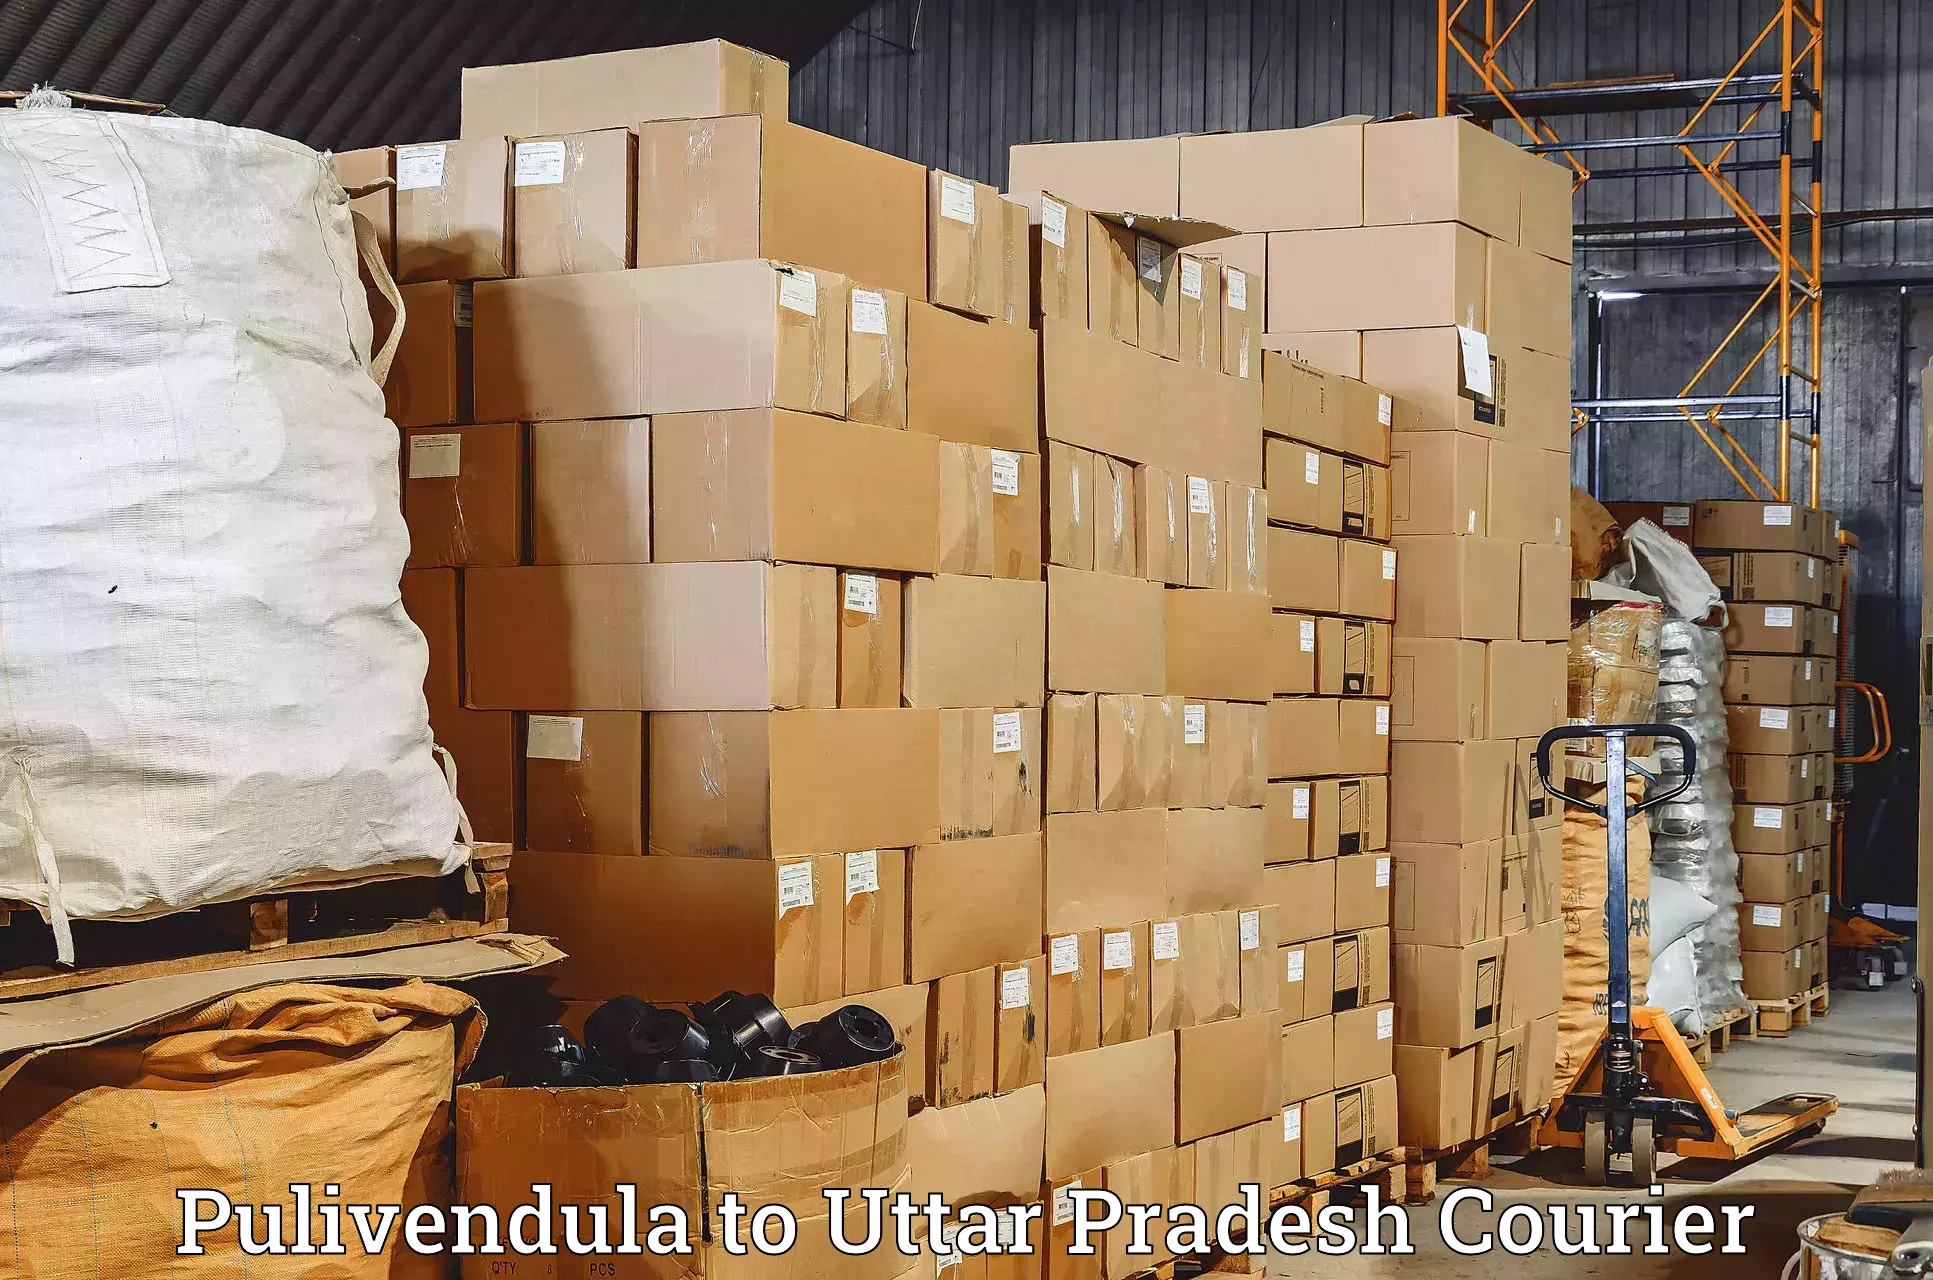 Nationwide parcel services Pulivendula to Agra